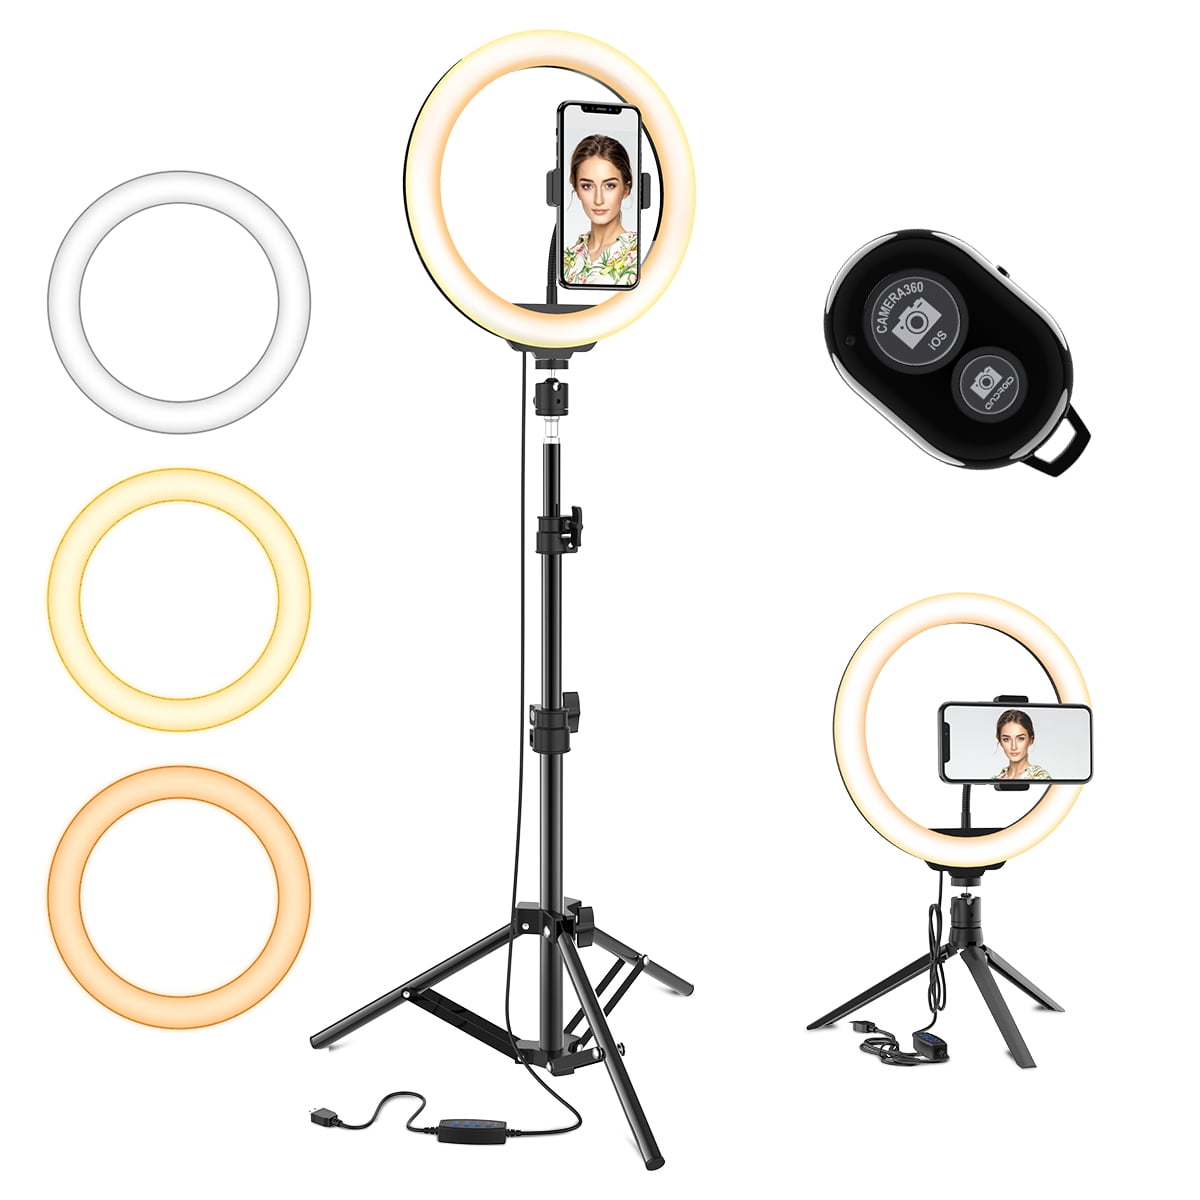 QYER Bright Ring Light,Ring Lights with Stand 230pcs 36w Ring Light with Stand and Phone Holder for Phone Makeup YouTube Video Live Beauty Color : Only Light 